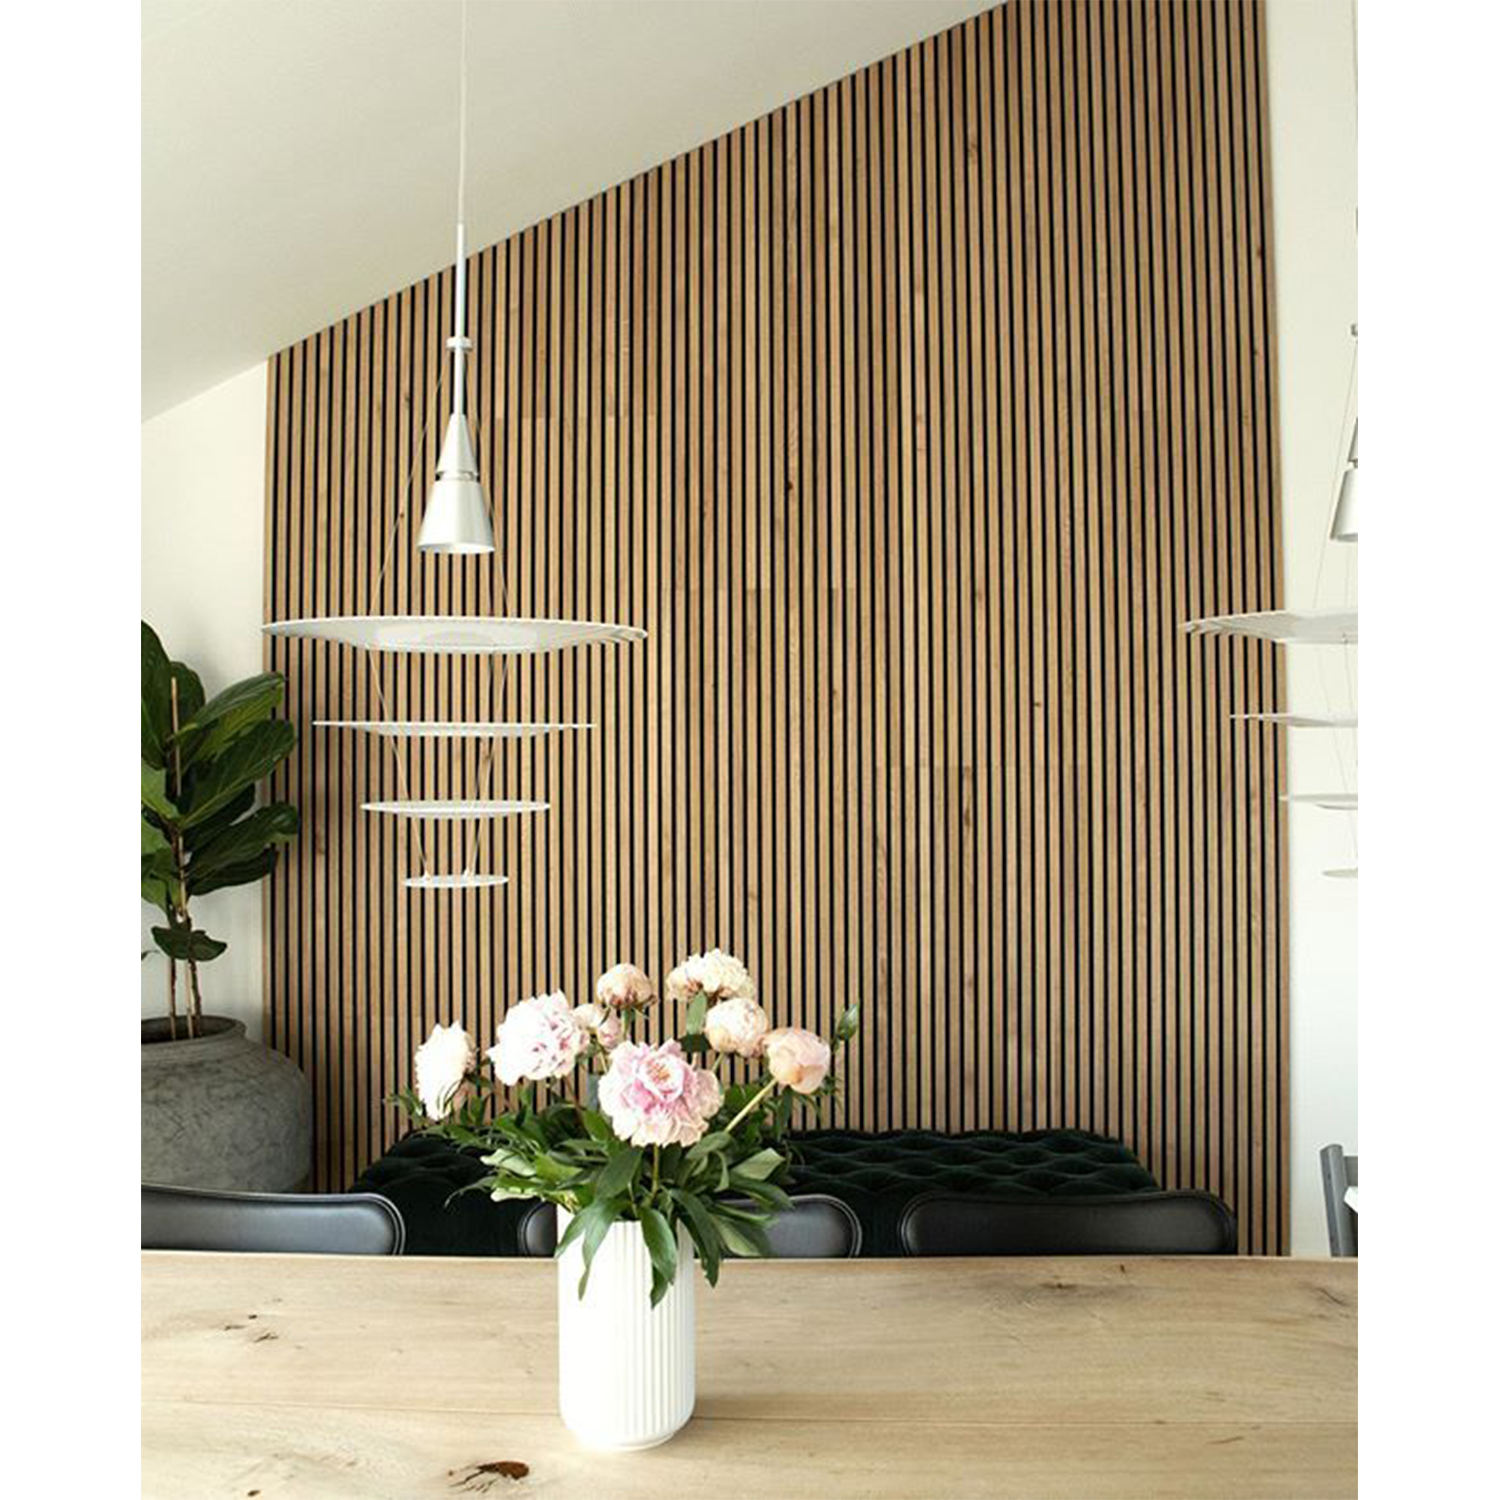 Apartment Ceiling Sound Absorbing Slatted Wall Panels